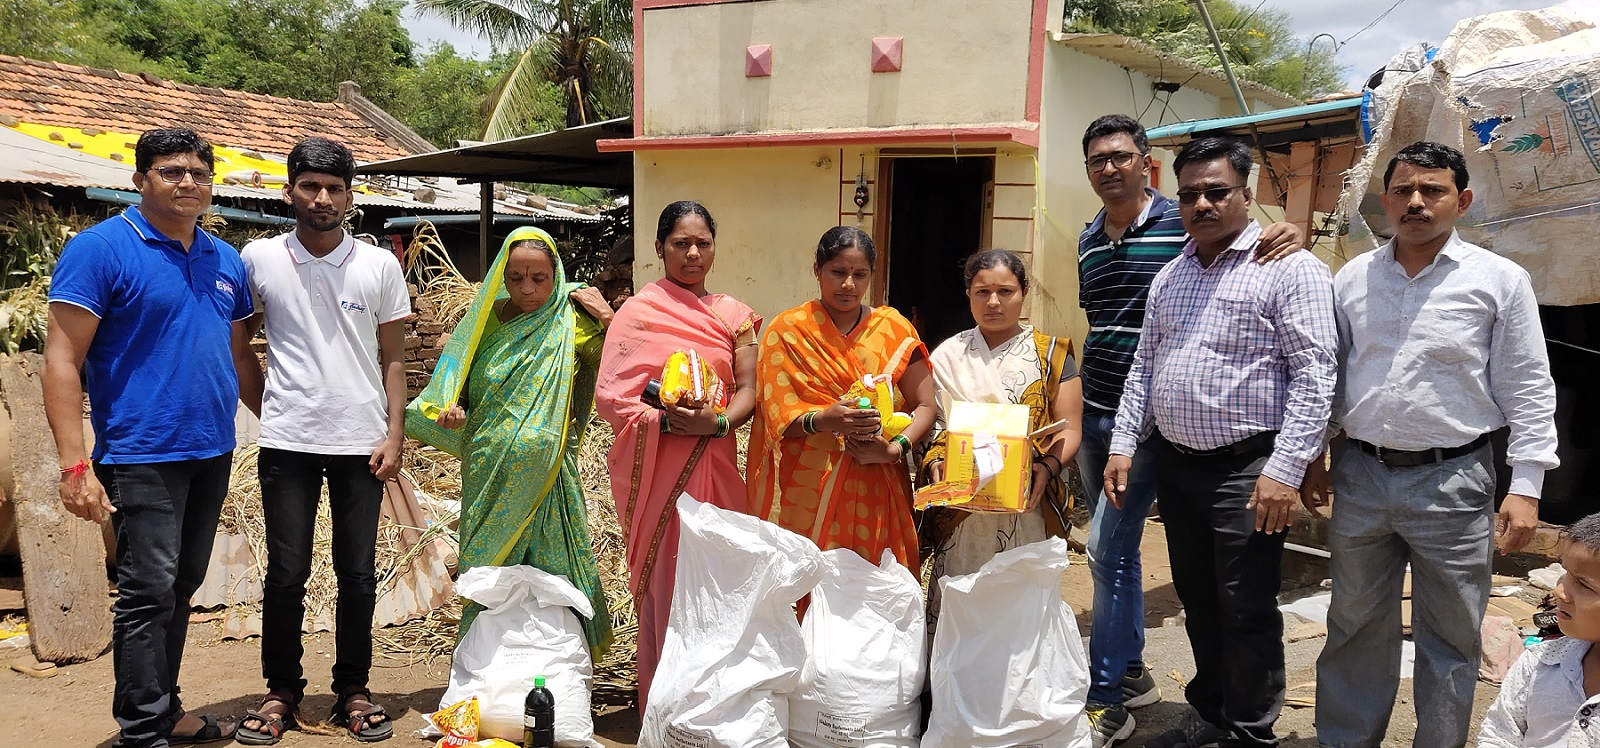 As part of Galaxy’s ‘Aapda Rahat’ CSR (Corporate Social Responsibility) programme, employees of Galaxy has extended flood-relief aid to 1,000 families in the districts of Sangli by distributing relief material like Food Items (rice, dal, oil, chana, wheat flour, salt, tea & sugar amongst others) as well as Household & Hygiene items (chaddar, satranji, candles, match boxes, mosquito repellants, soaps and floor cleaners) to the villagers.